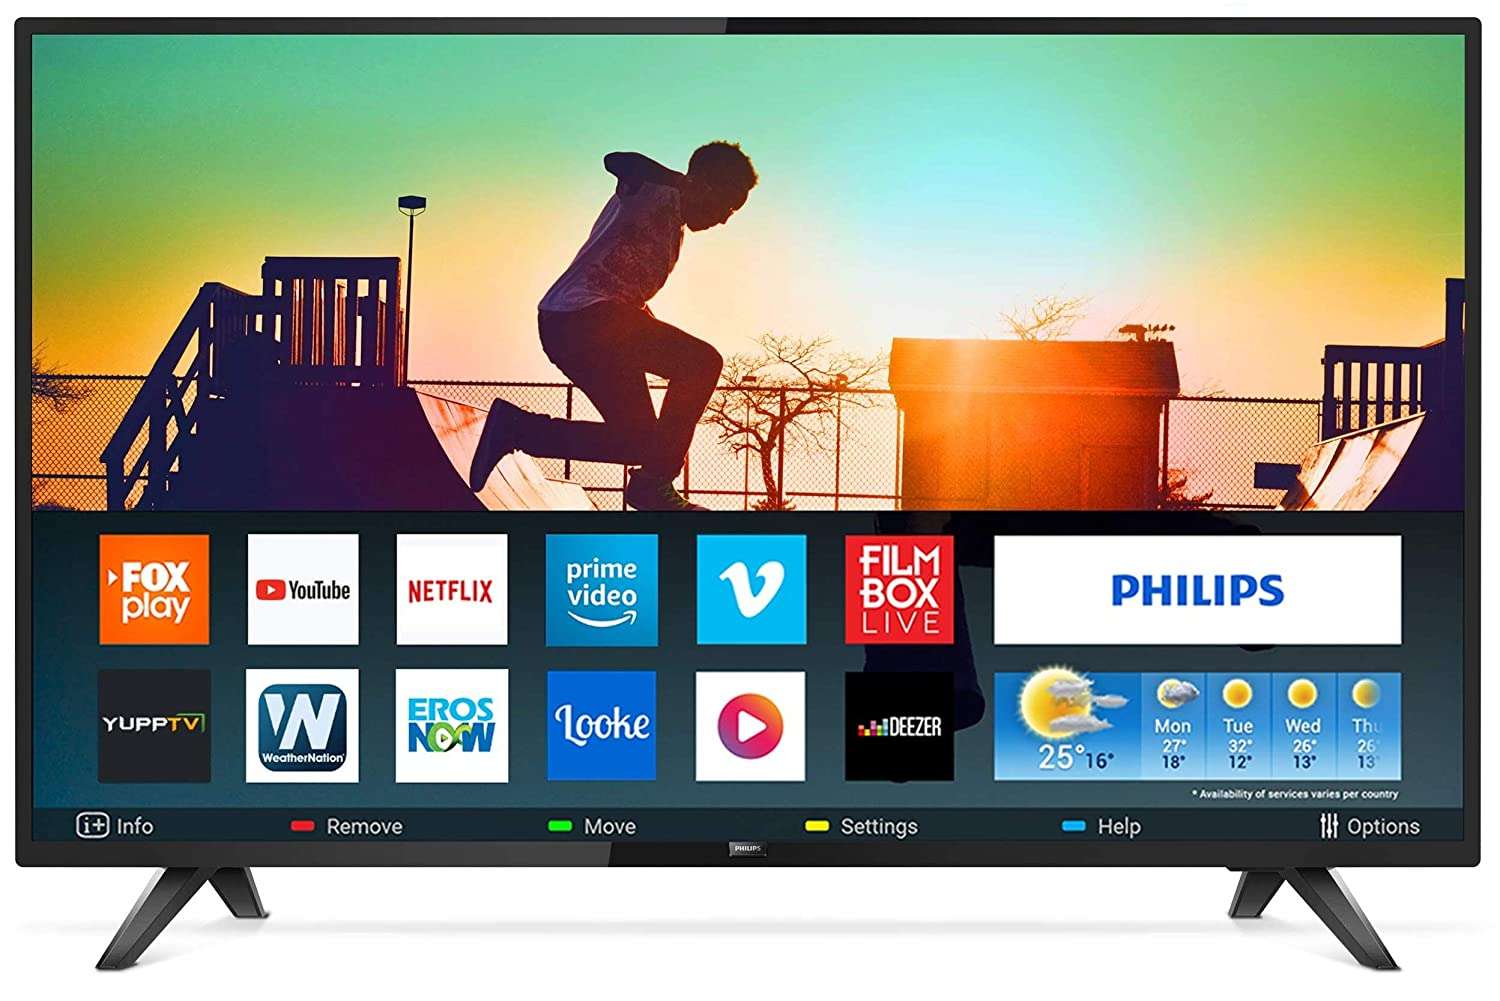 Philips 43 Inch LED Full HD TV (5800 Series 43PFT5813S/94) Online at ...